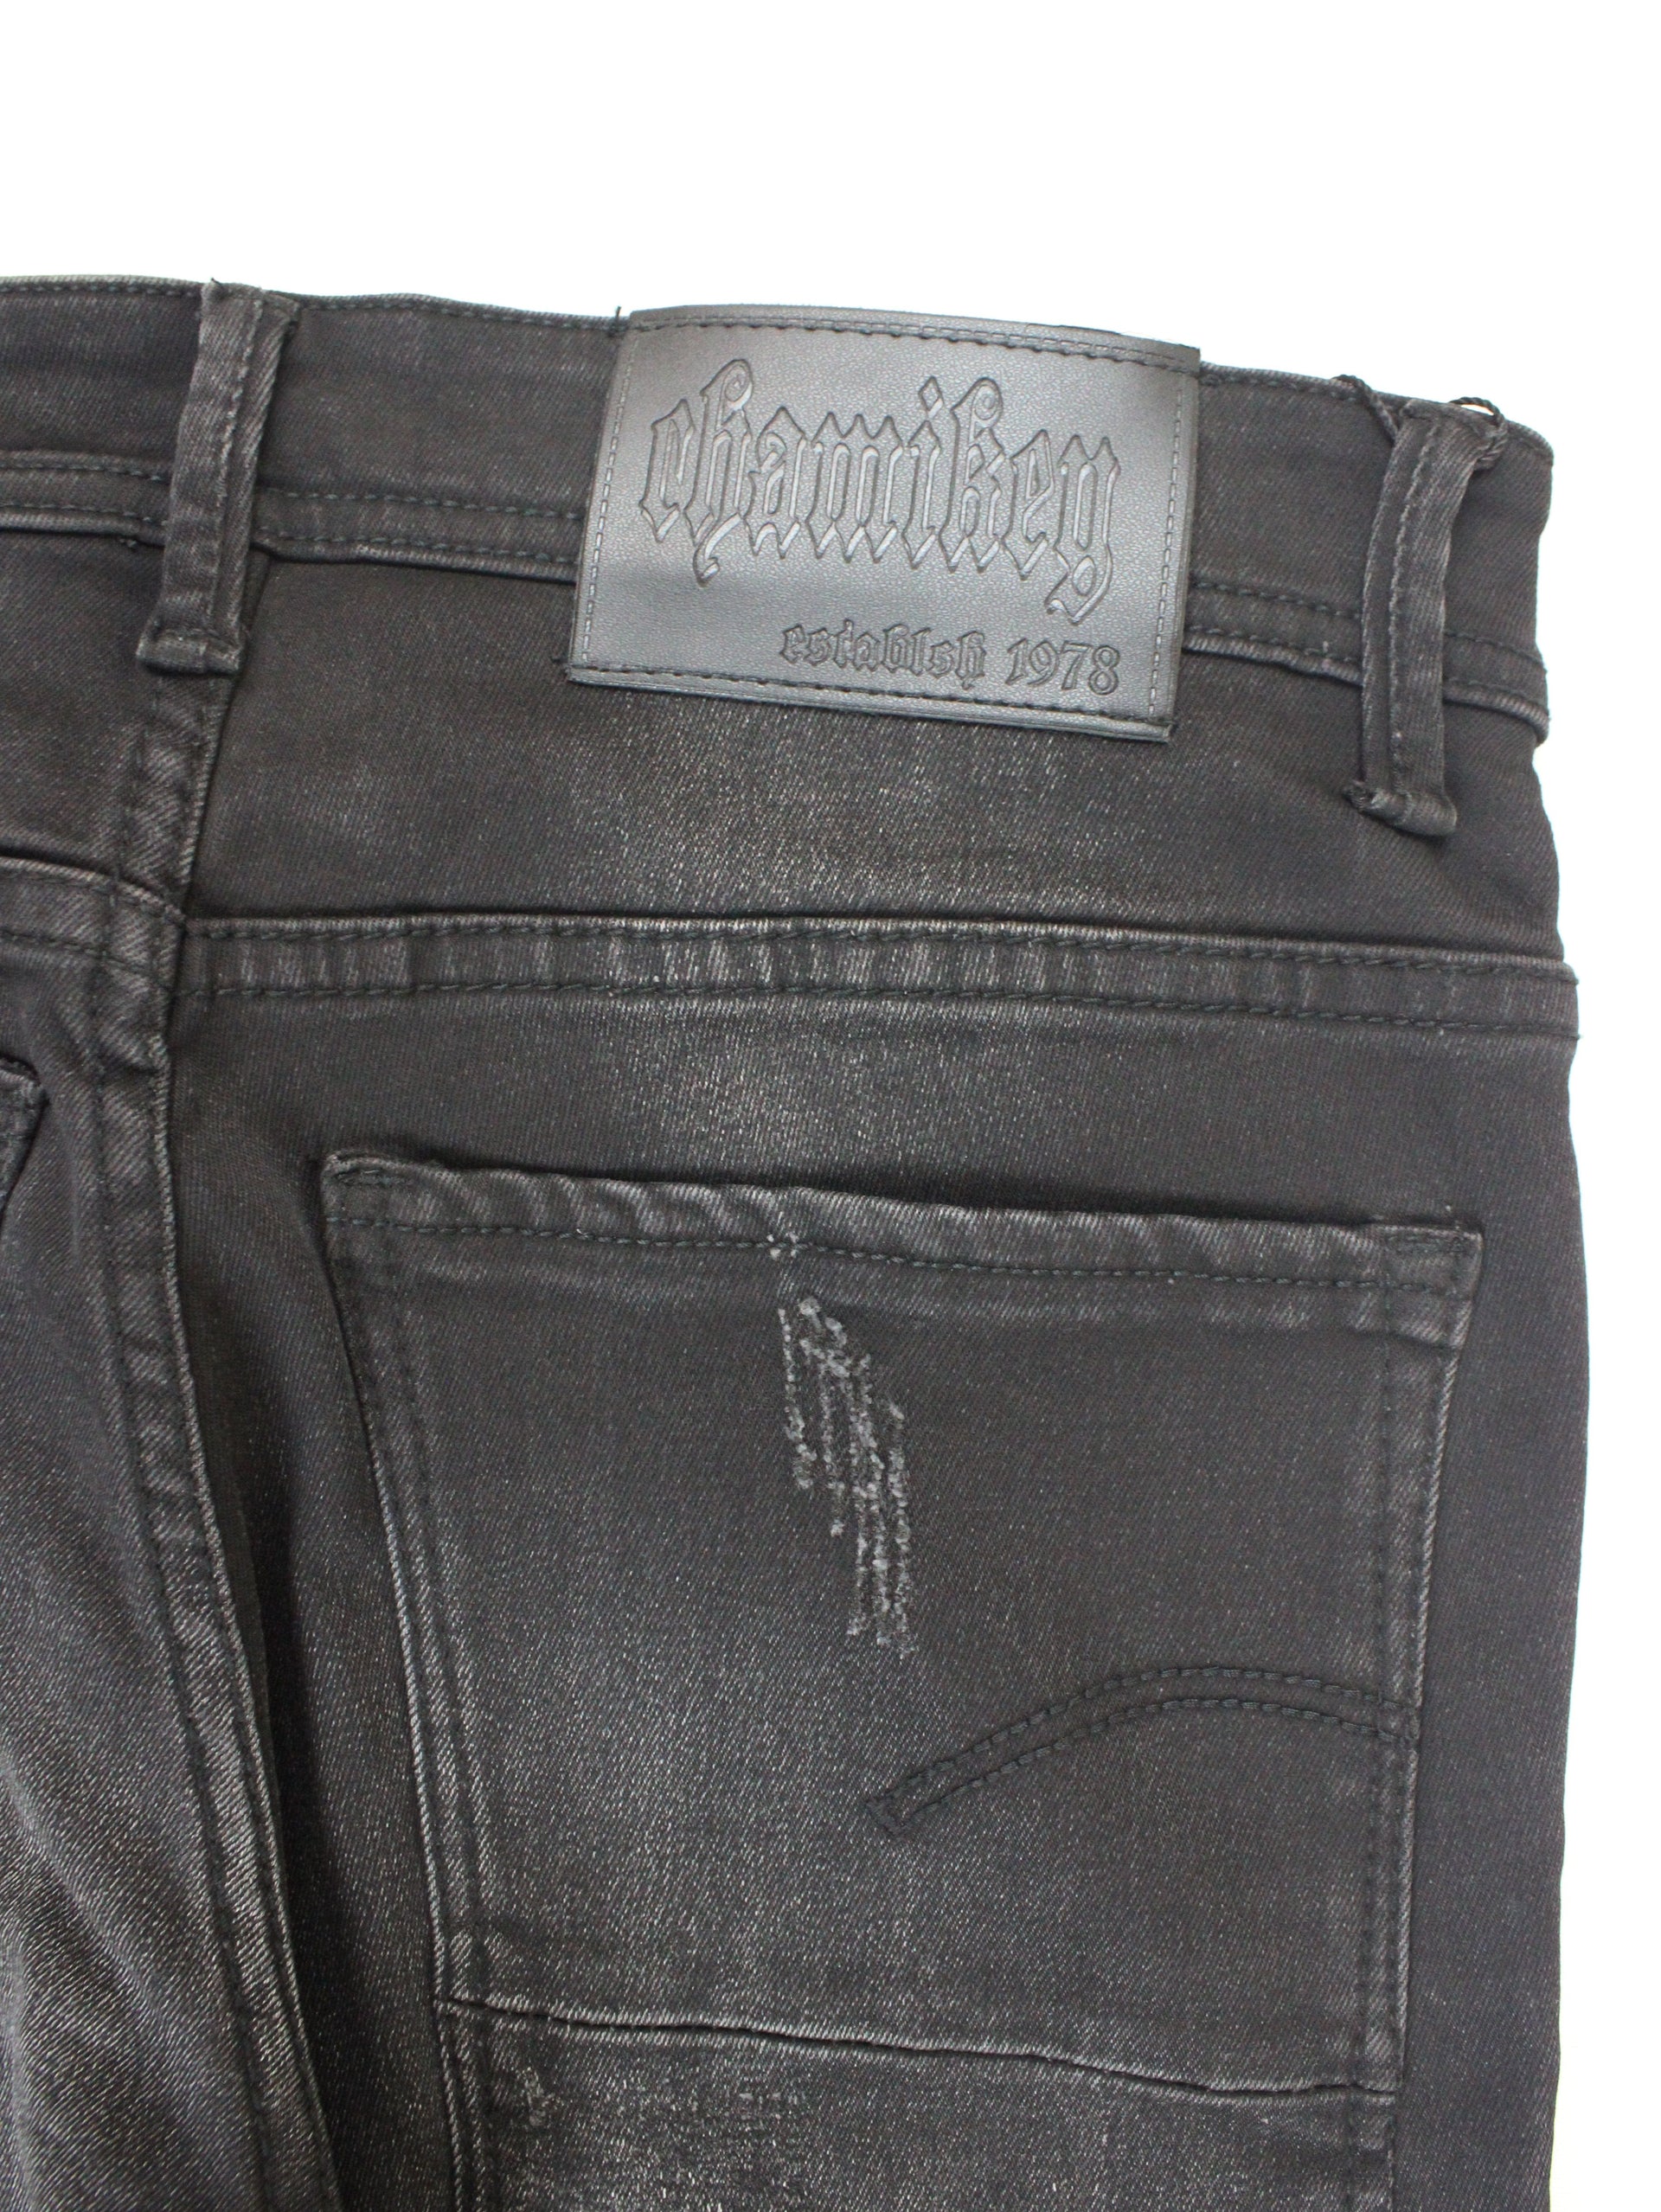 CHAMIKEY Black Coated Jeans